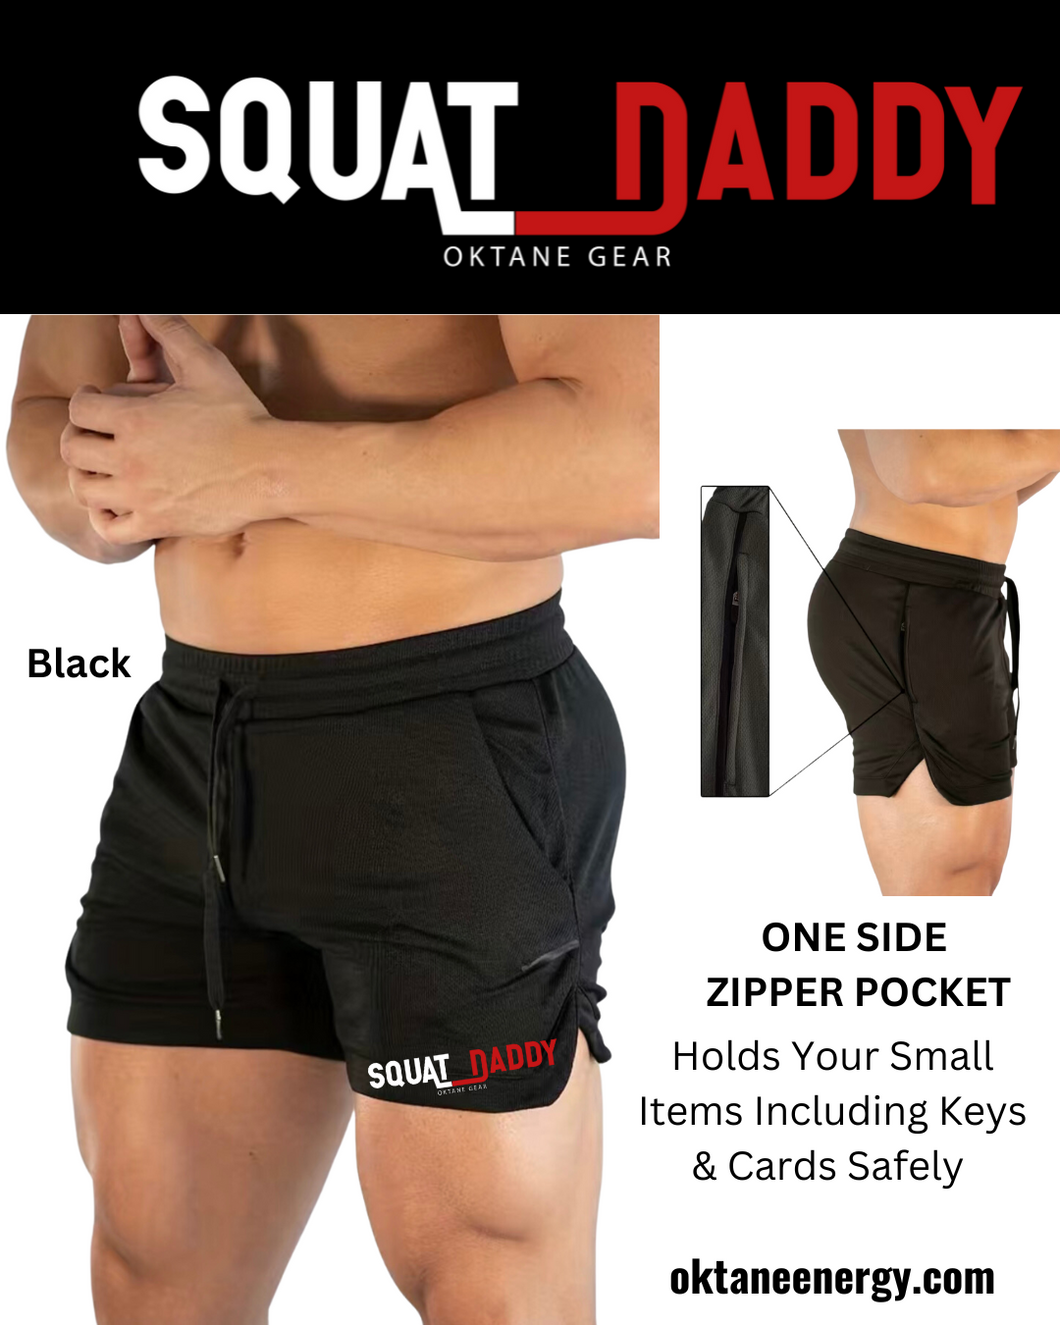 NEW Squat Daddy Performance Shorts